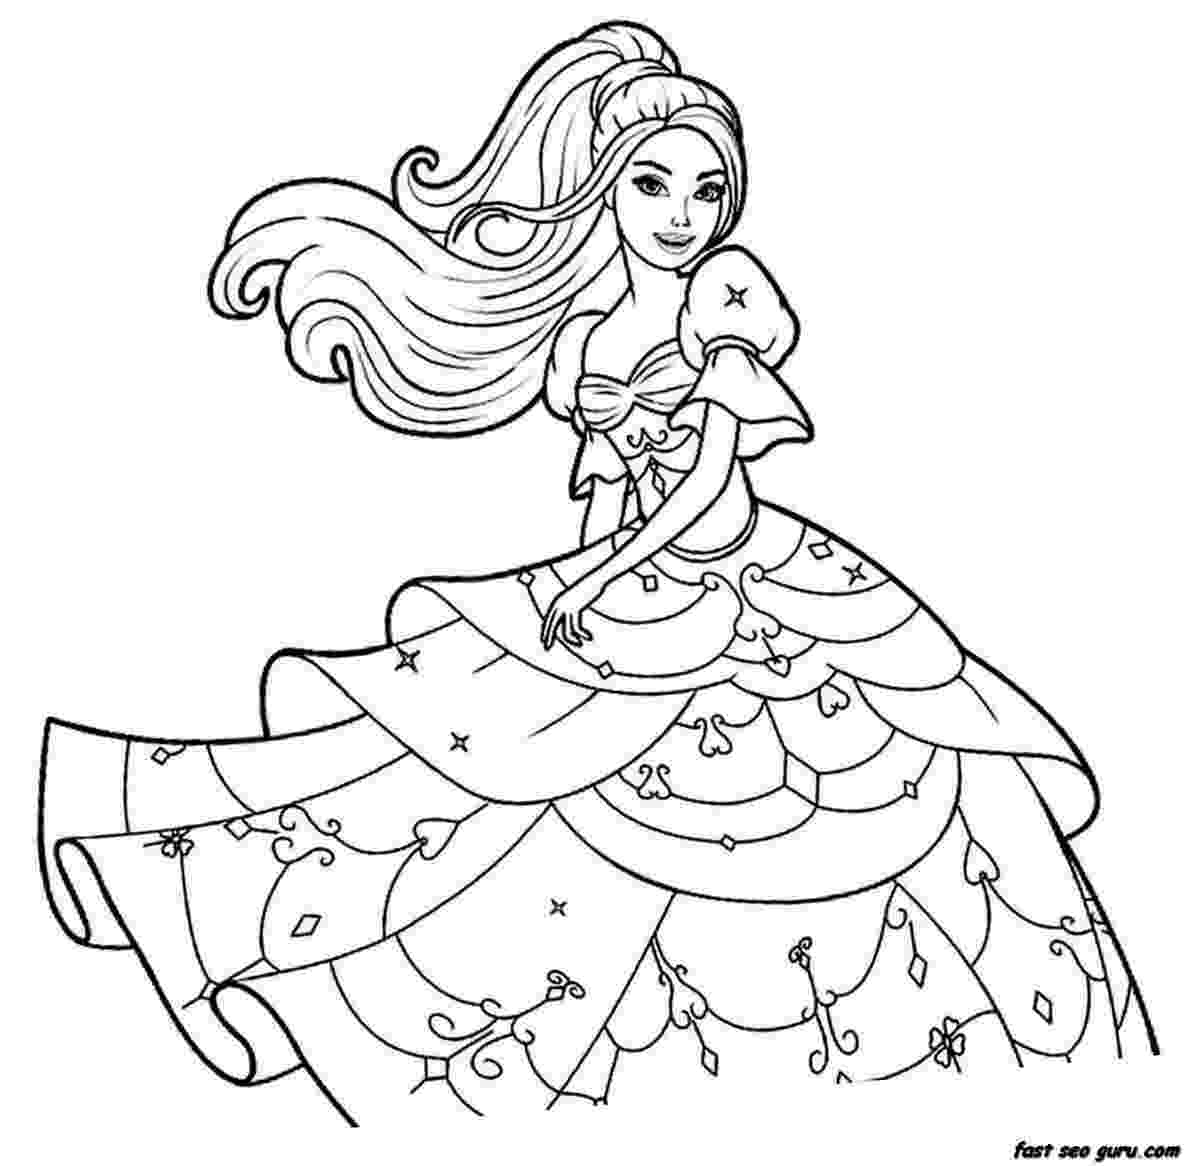 girl colering pages cute girl coloring pages to download and print for free pages colering girl 